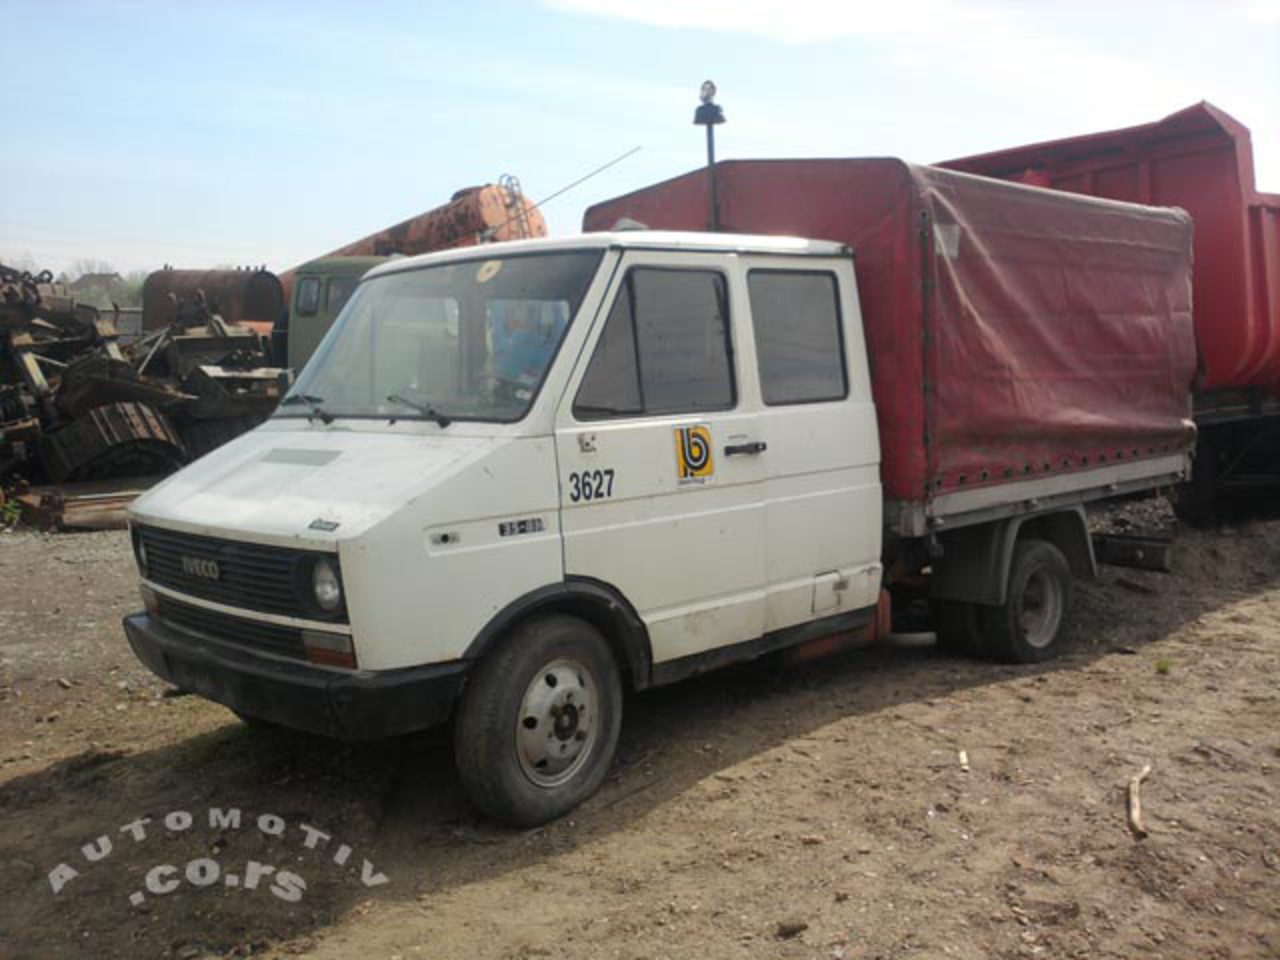 Zastava-iveco rival. Best photos and information of modification.